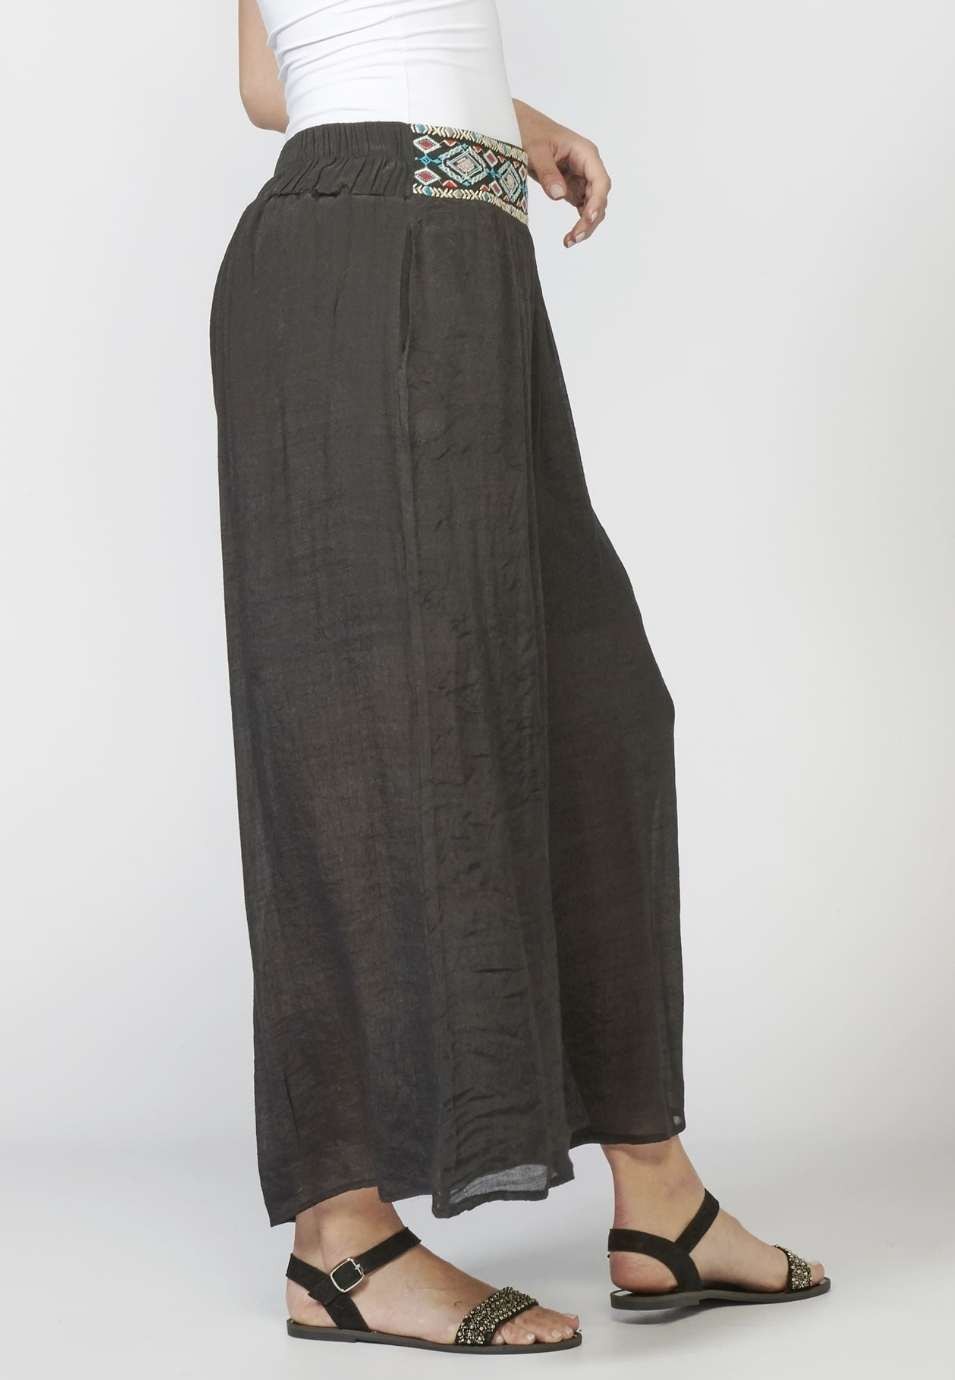 Women's long elastic trousers with sash and Ethnic Embroidered Detail in Black color 5